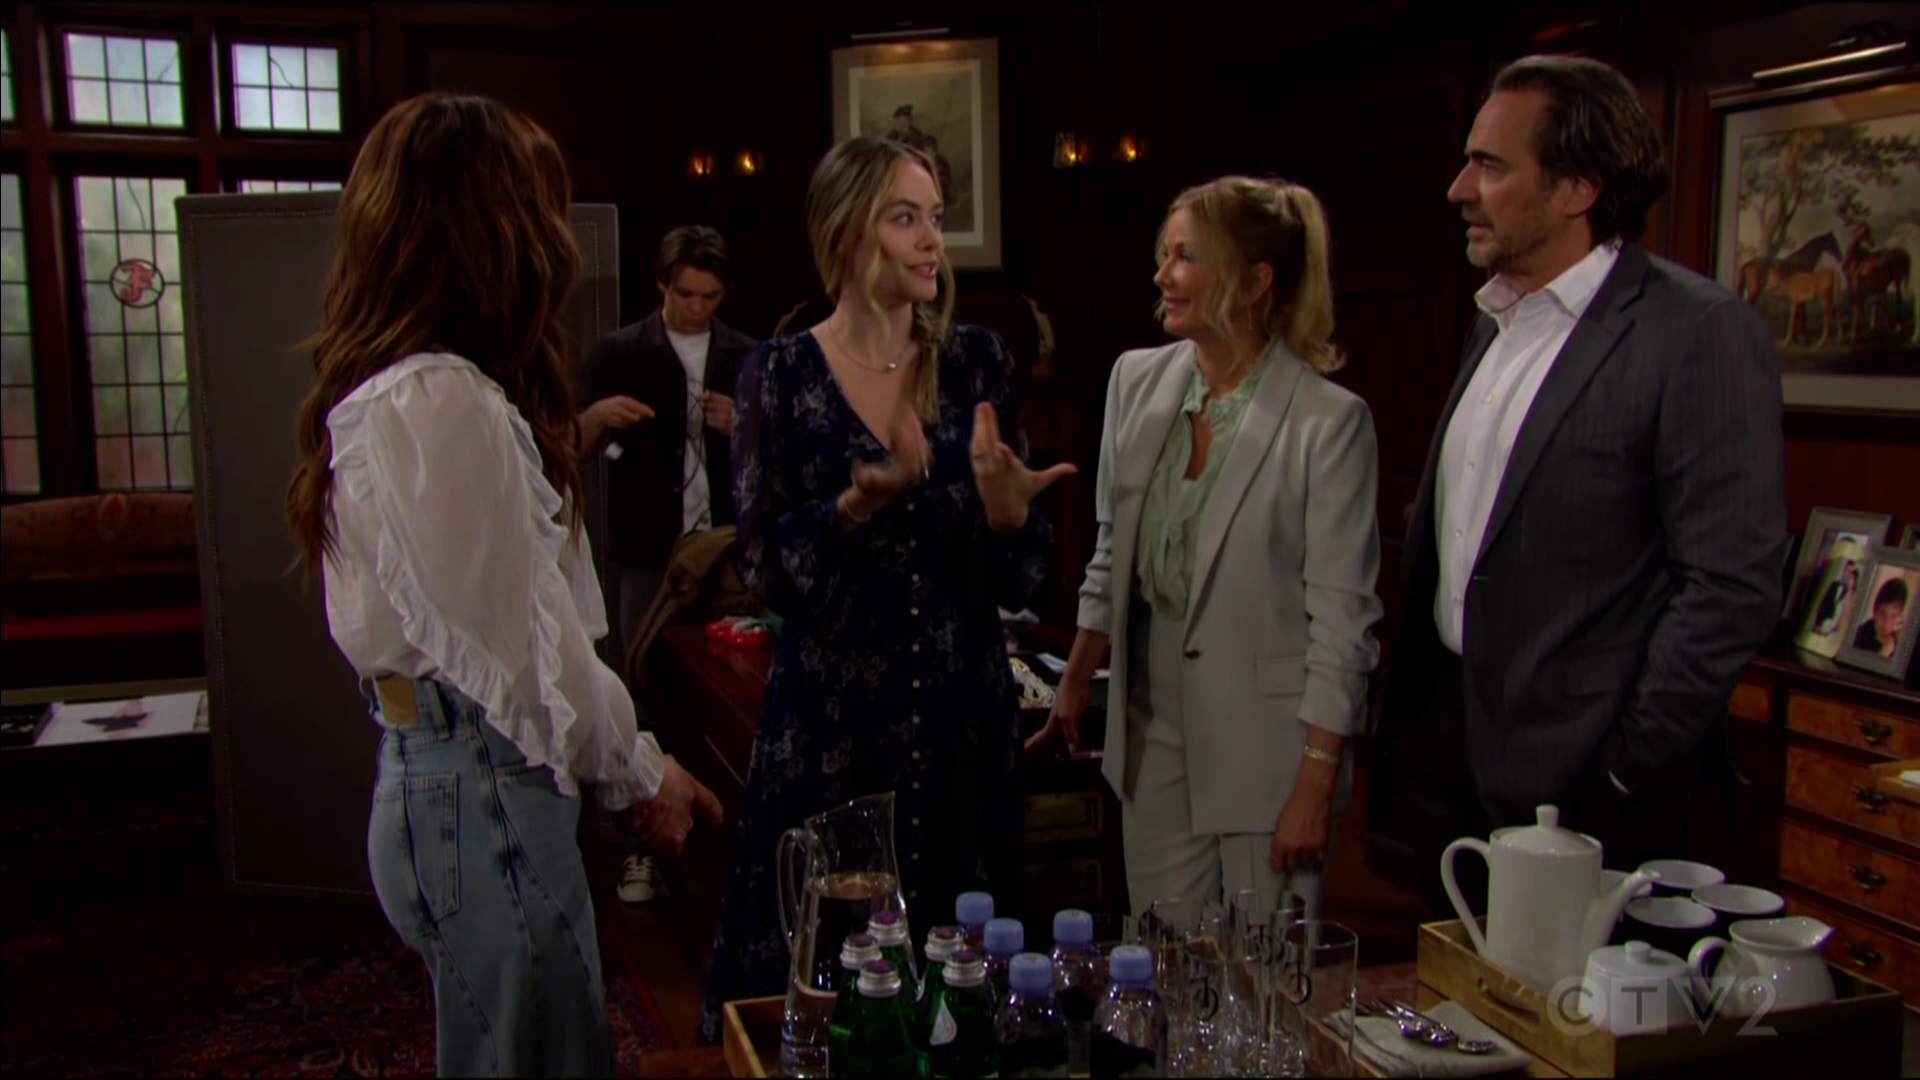 brooke and taylor talk to hope and ridge about rj returning.